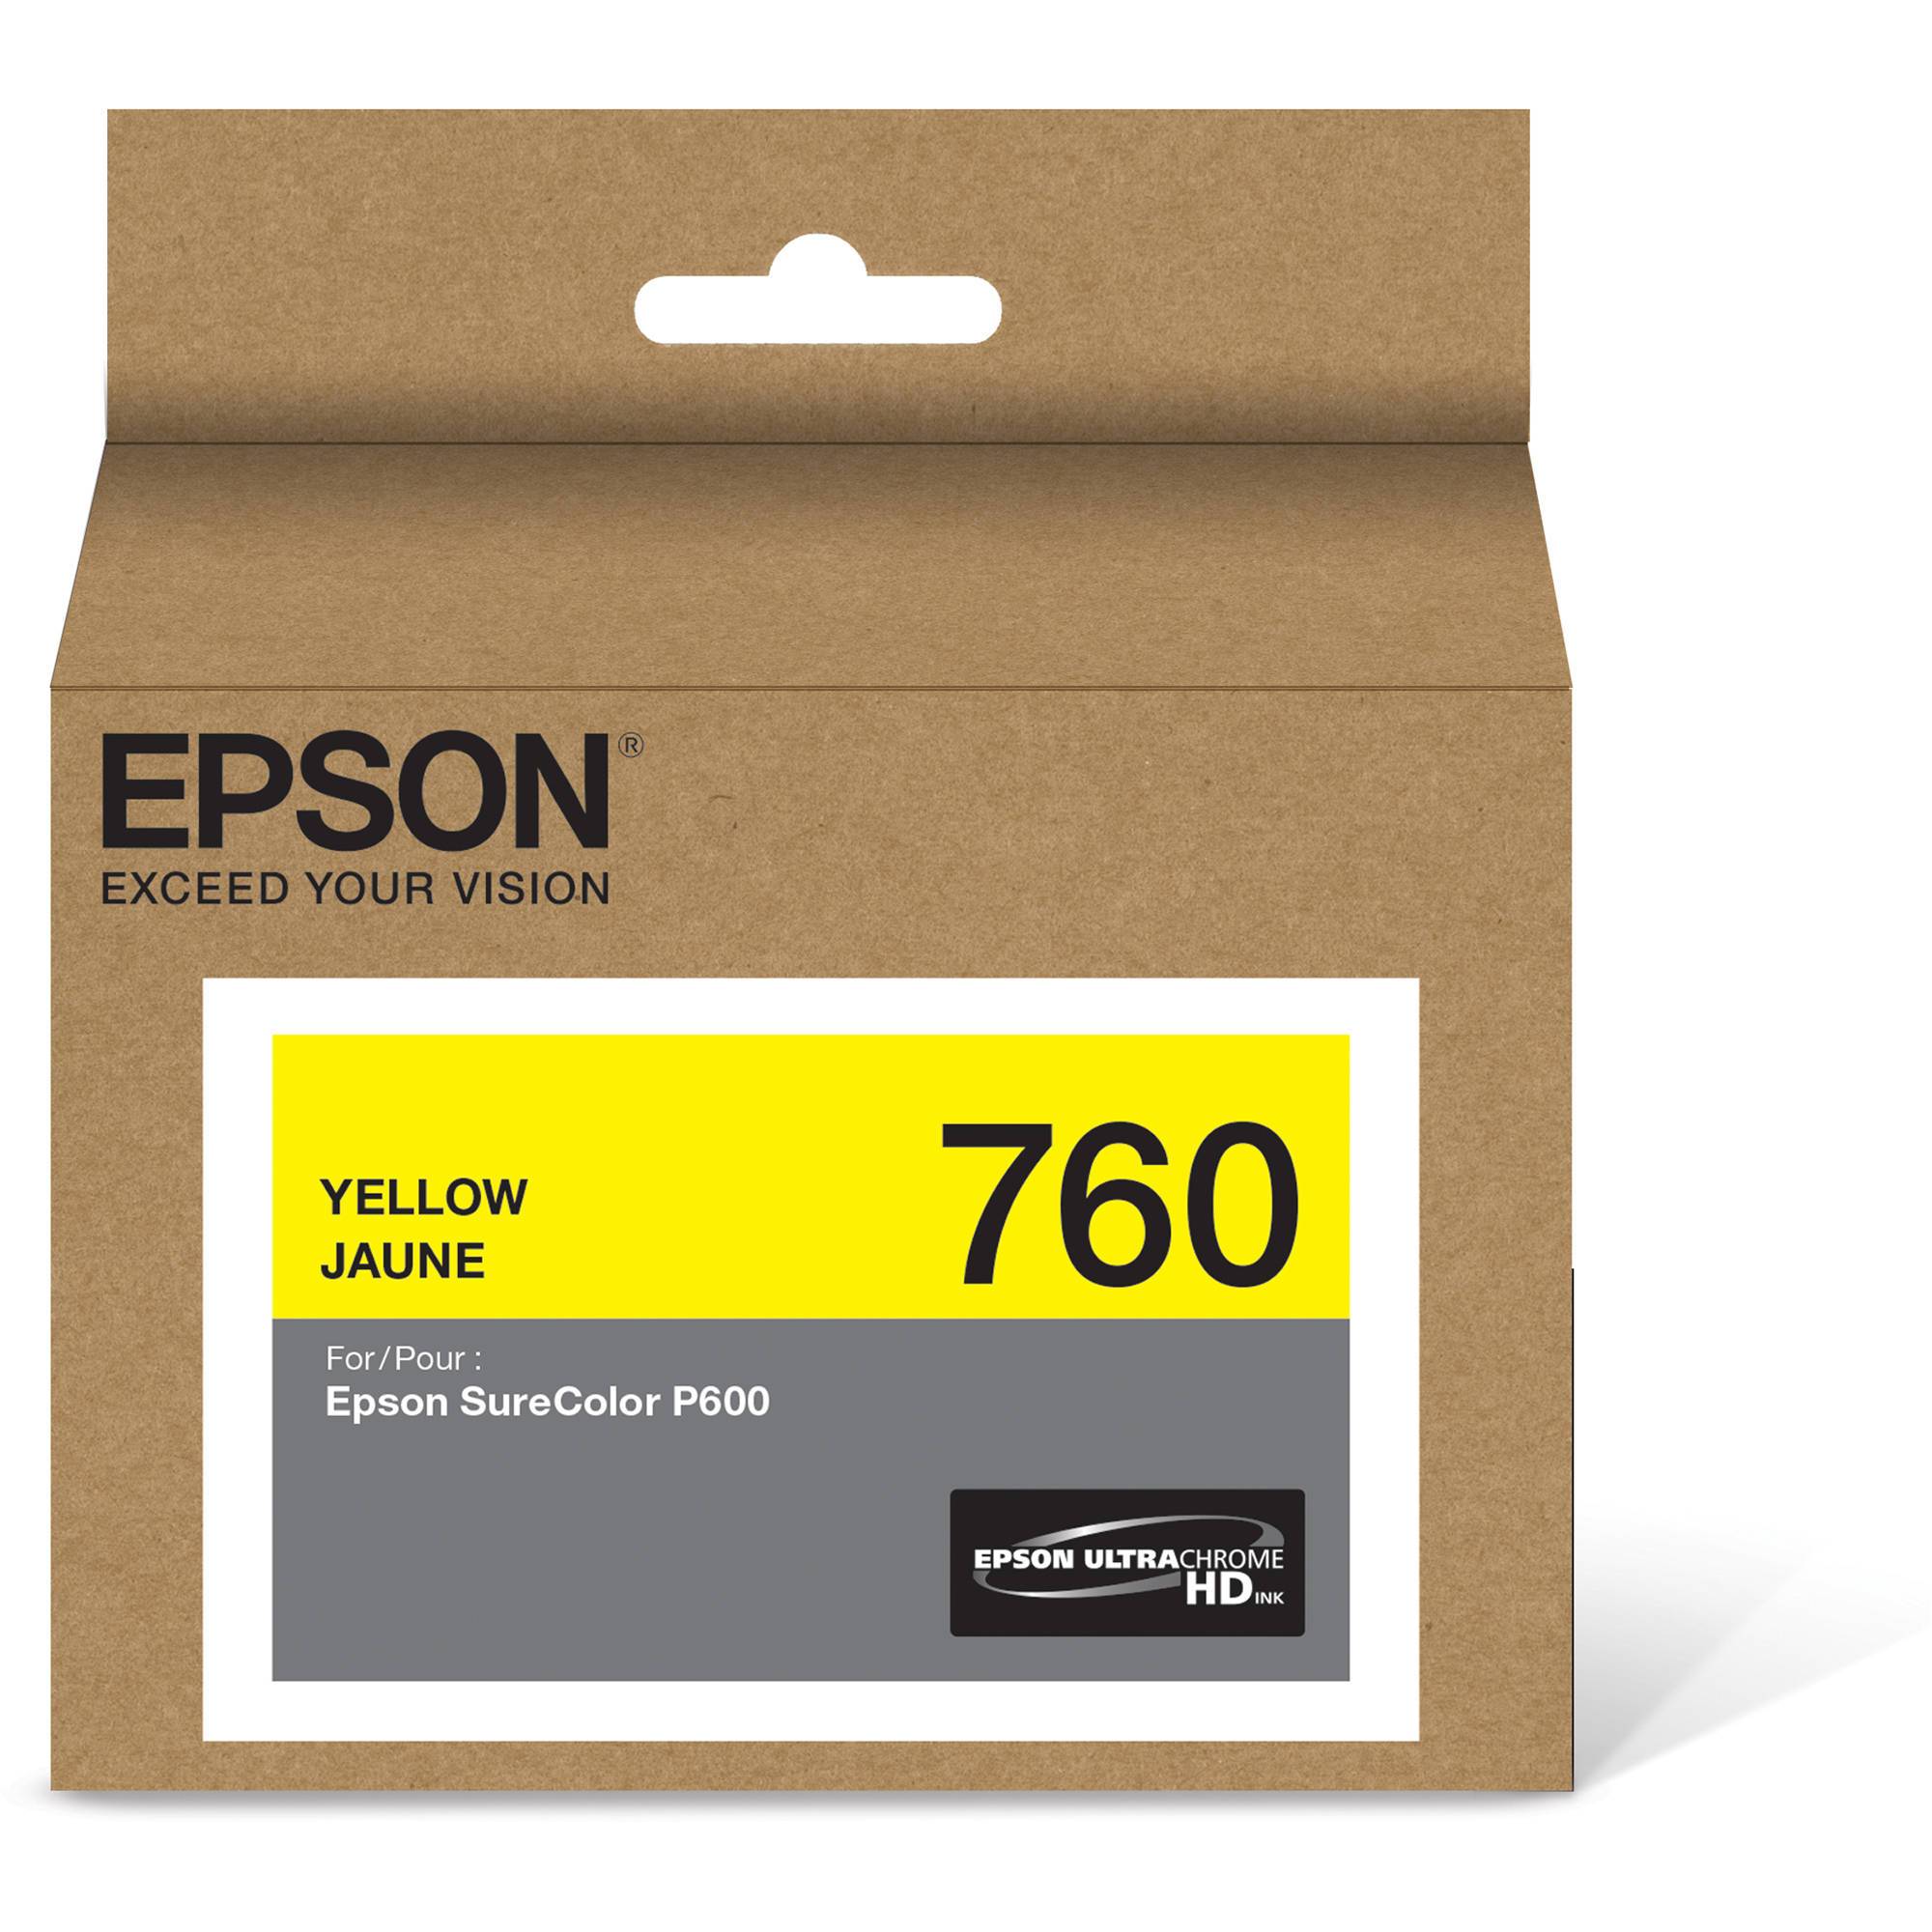 Absolute Toner T760420 EPSON ULTRACHROME HD YELLOW INK 26ML, SURECOLOR P600 Epson Ink Cartridges